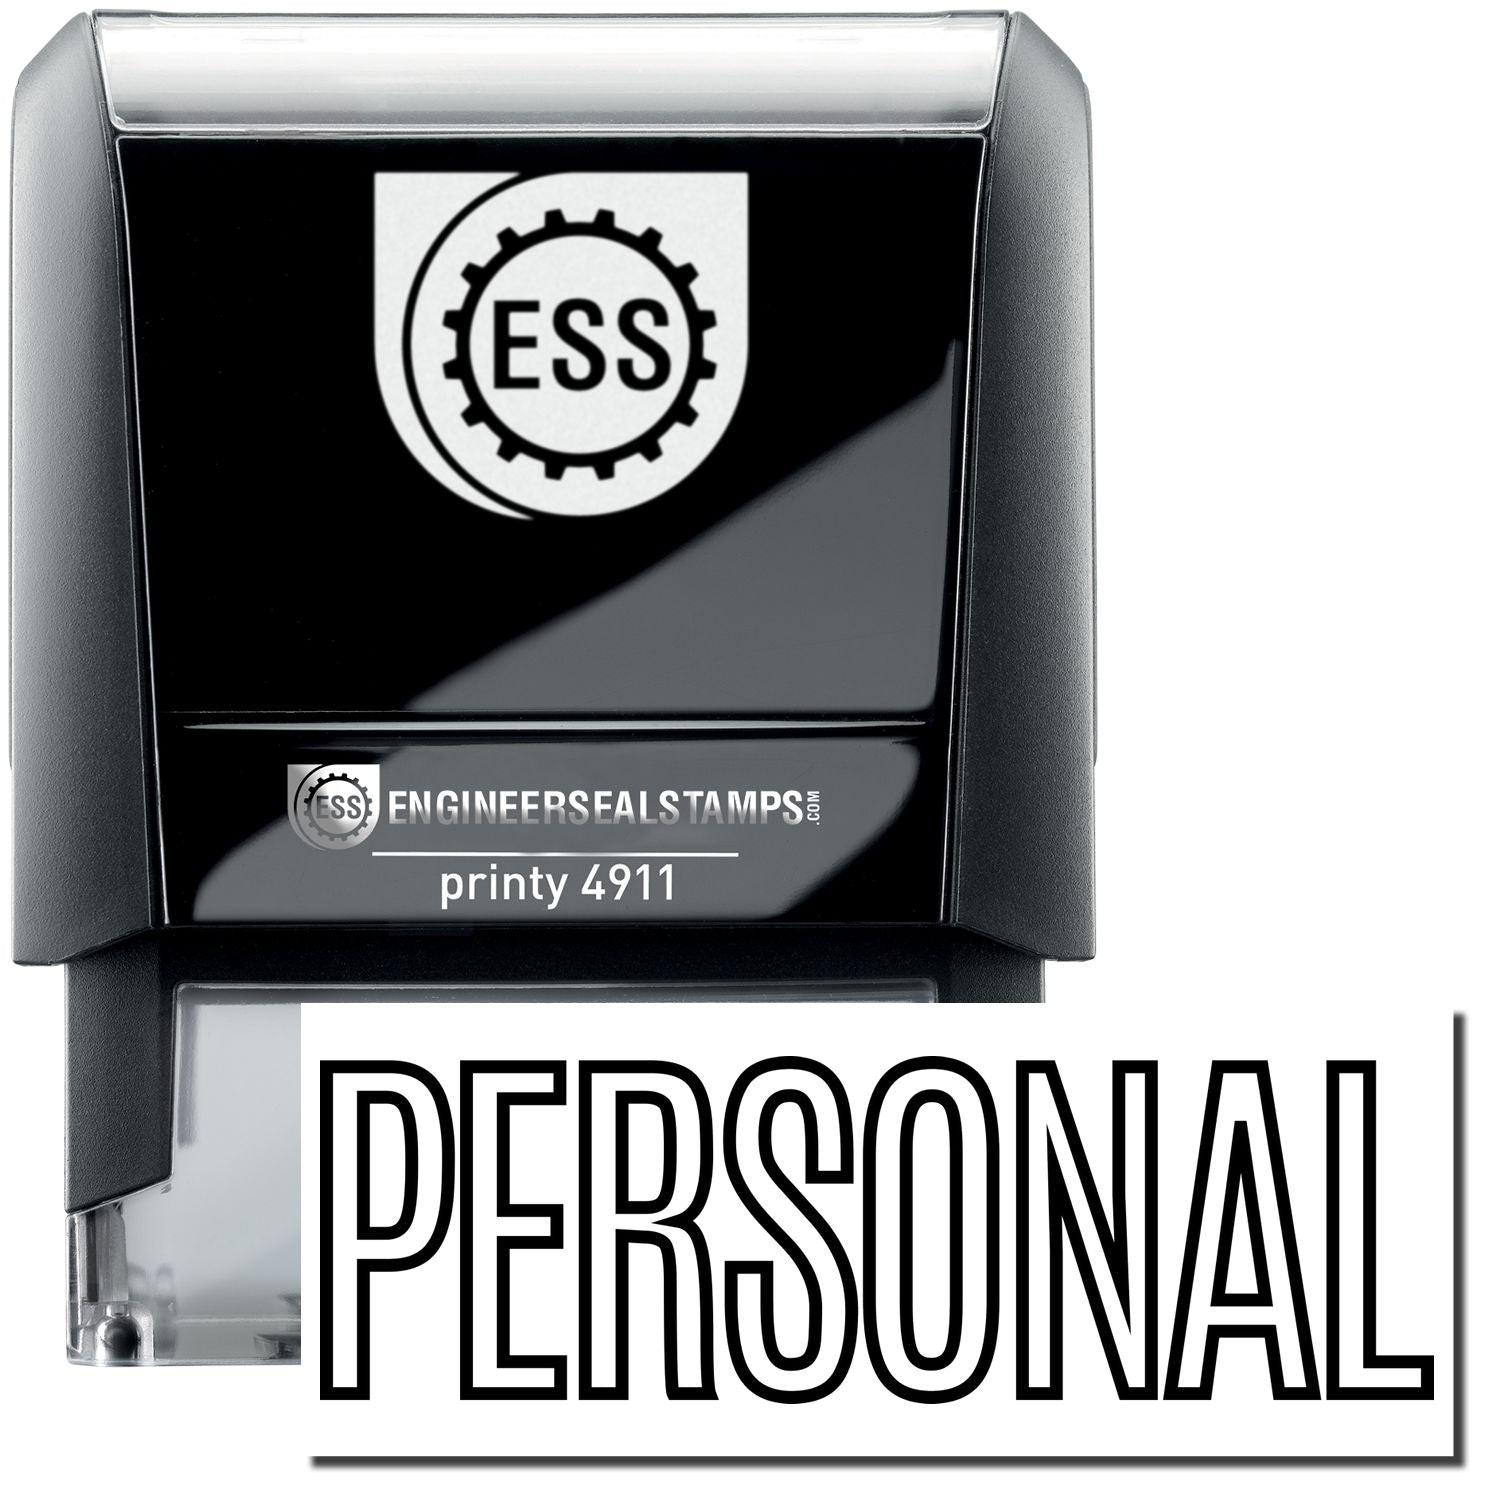 A self-inking stamp with a stamped image showing how the text "PERSONAL" in an outline style is displayed after stamping.